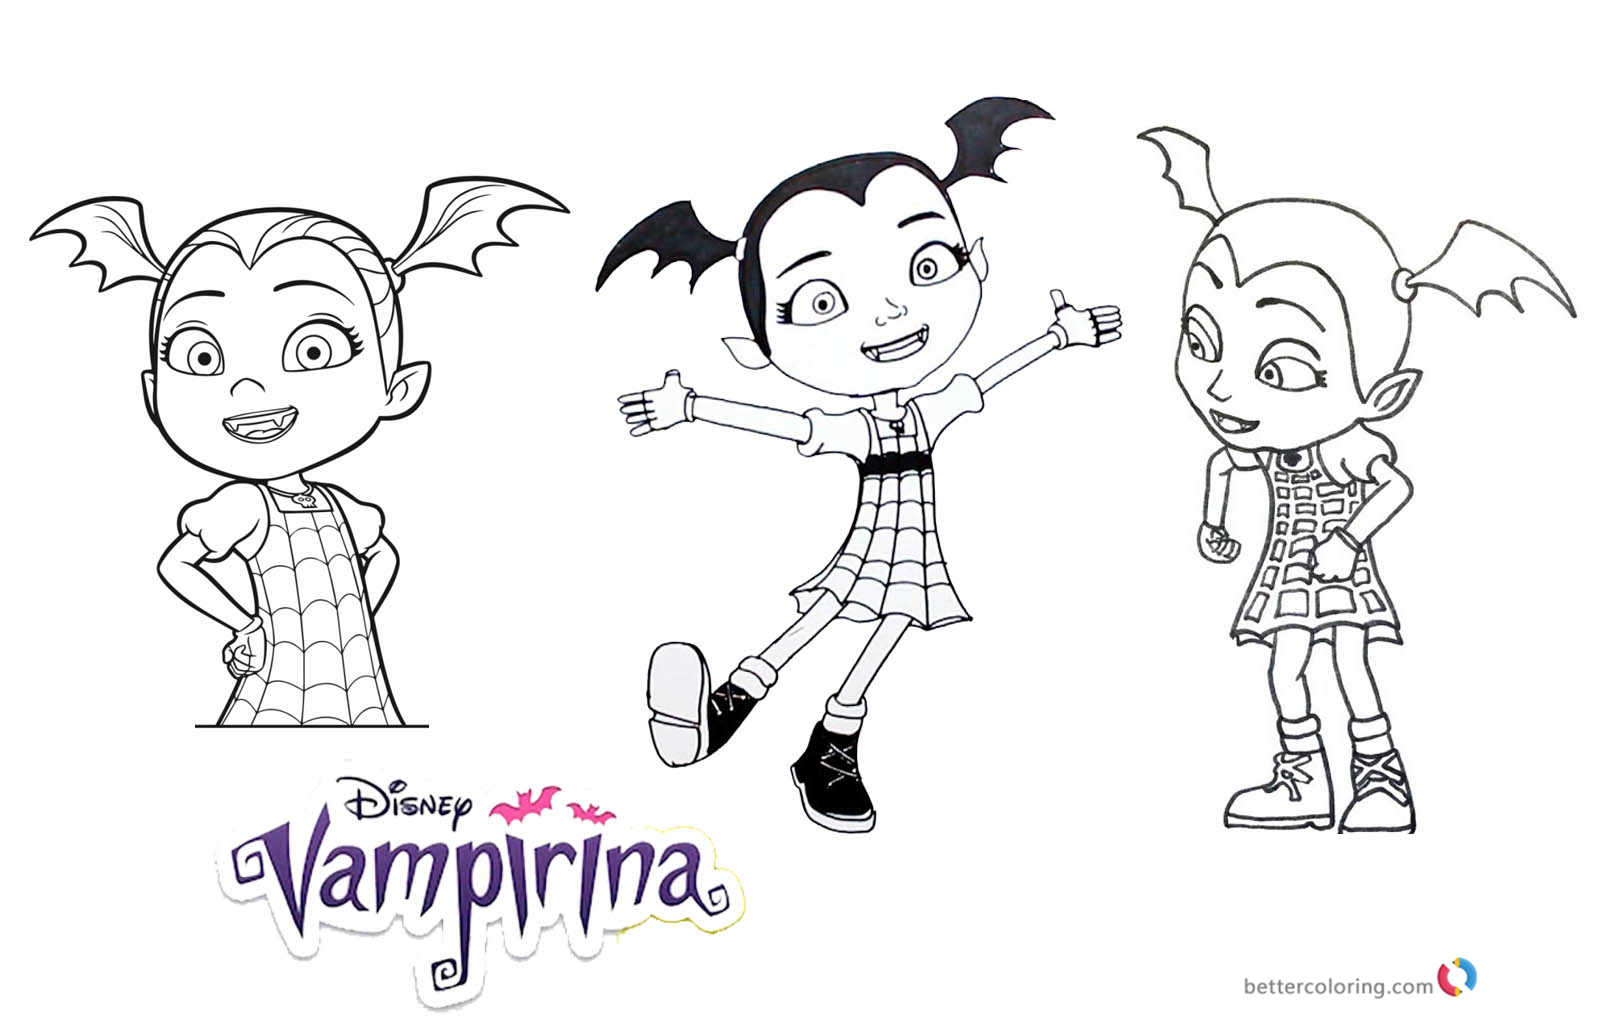 vampirina-coloring-pages-3-in-1-free-printable-coloring-pages